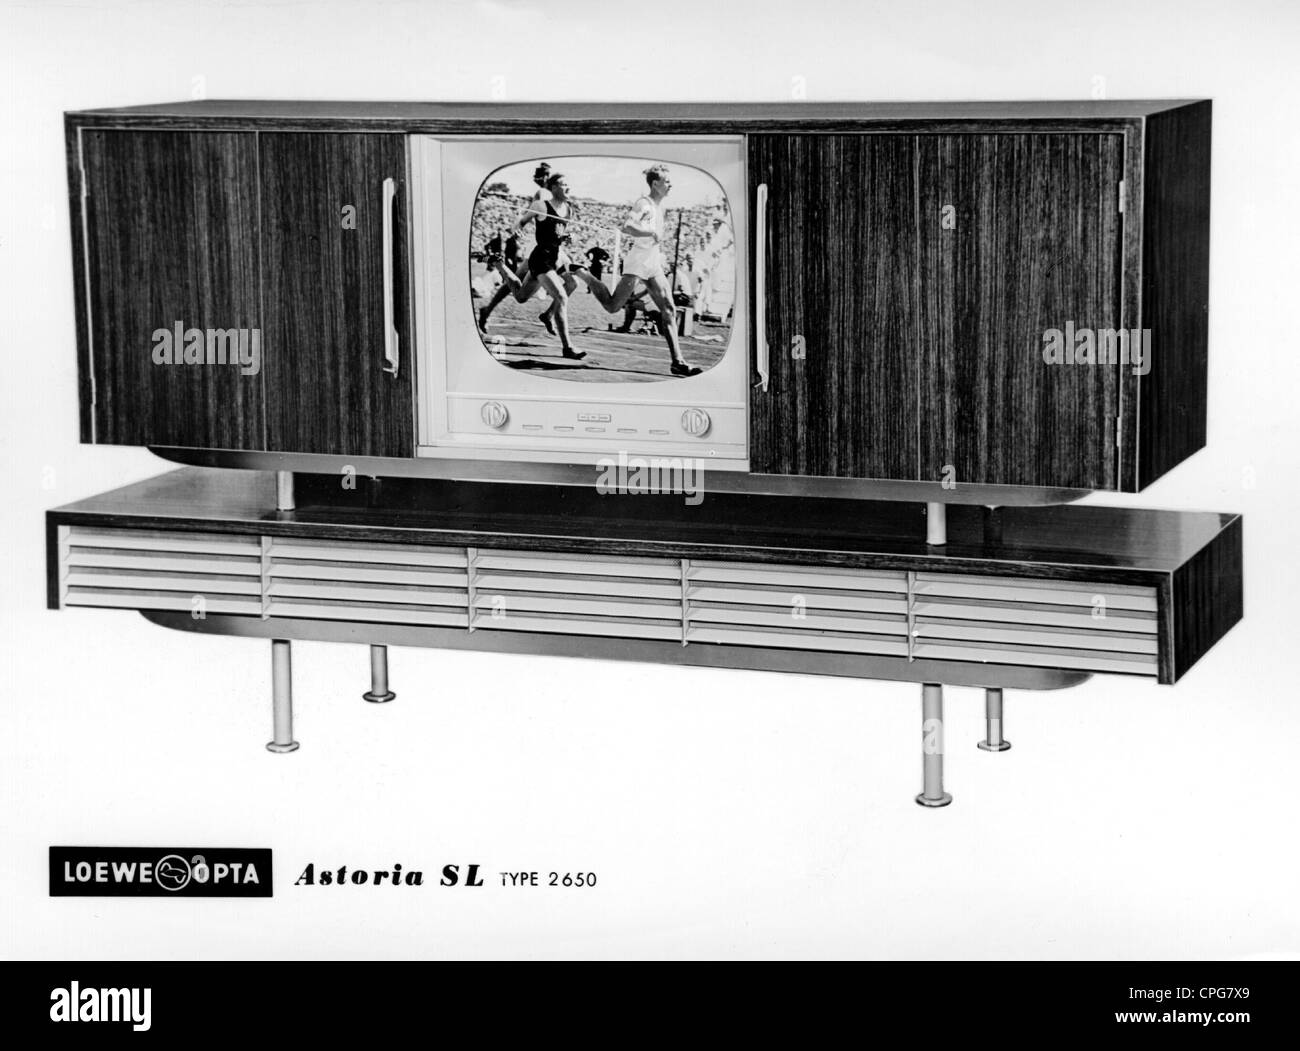 Broadcast, televisione, tv set 'Astoria SL' (tipo 2650), 1950, , Additional-Rights-Clearences-not available Foto Stock